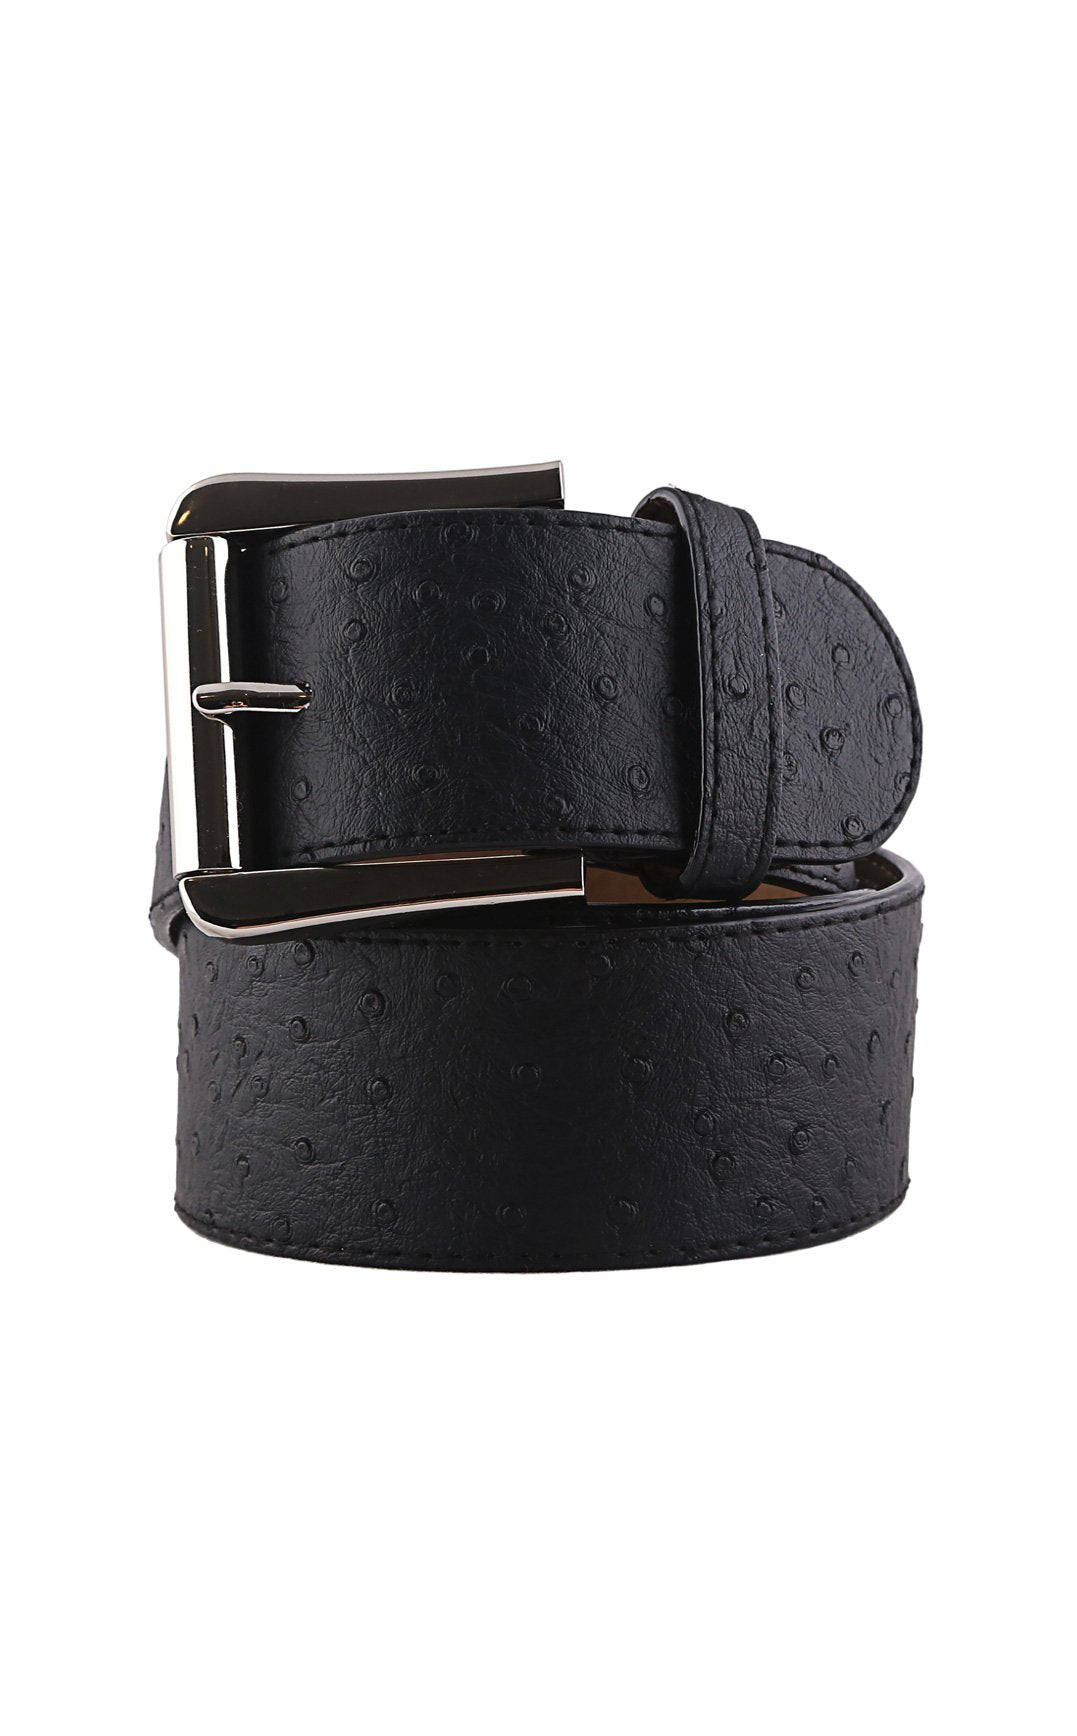 GhoDho Cruelty Free Belt - 2 " curved